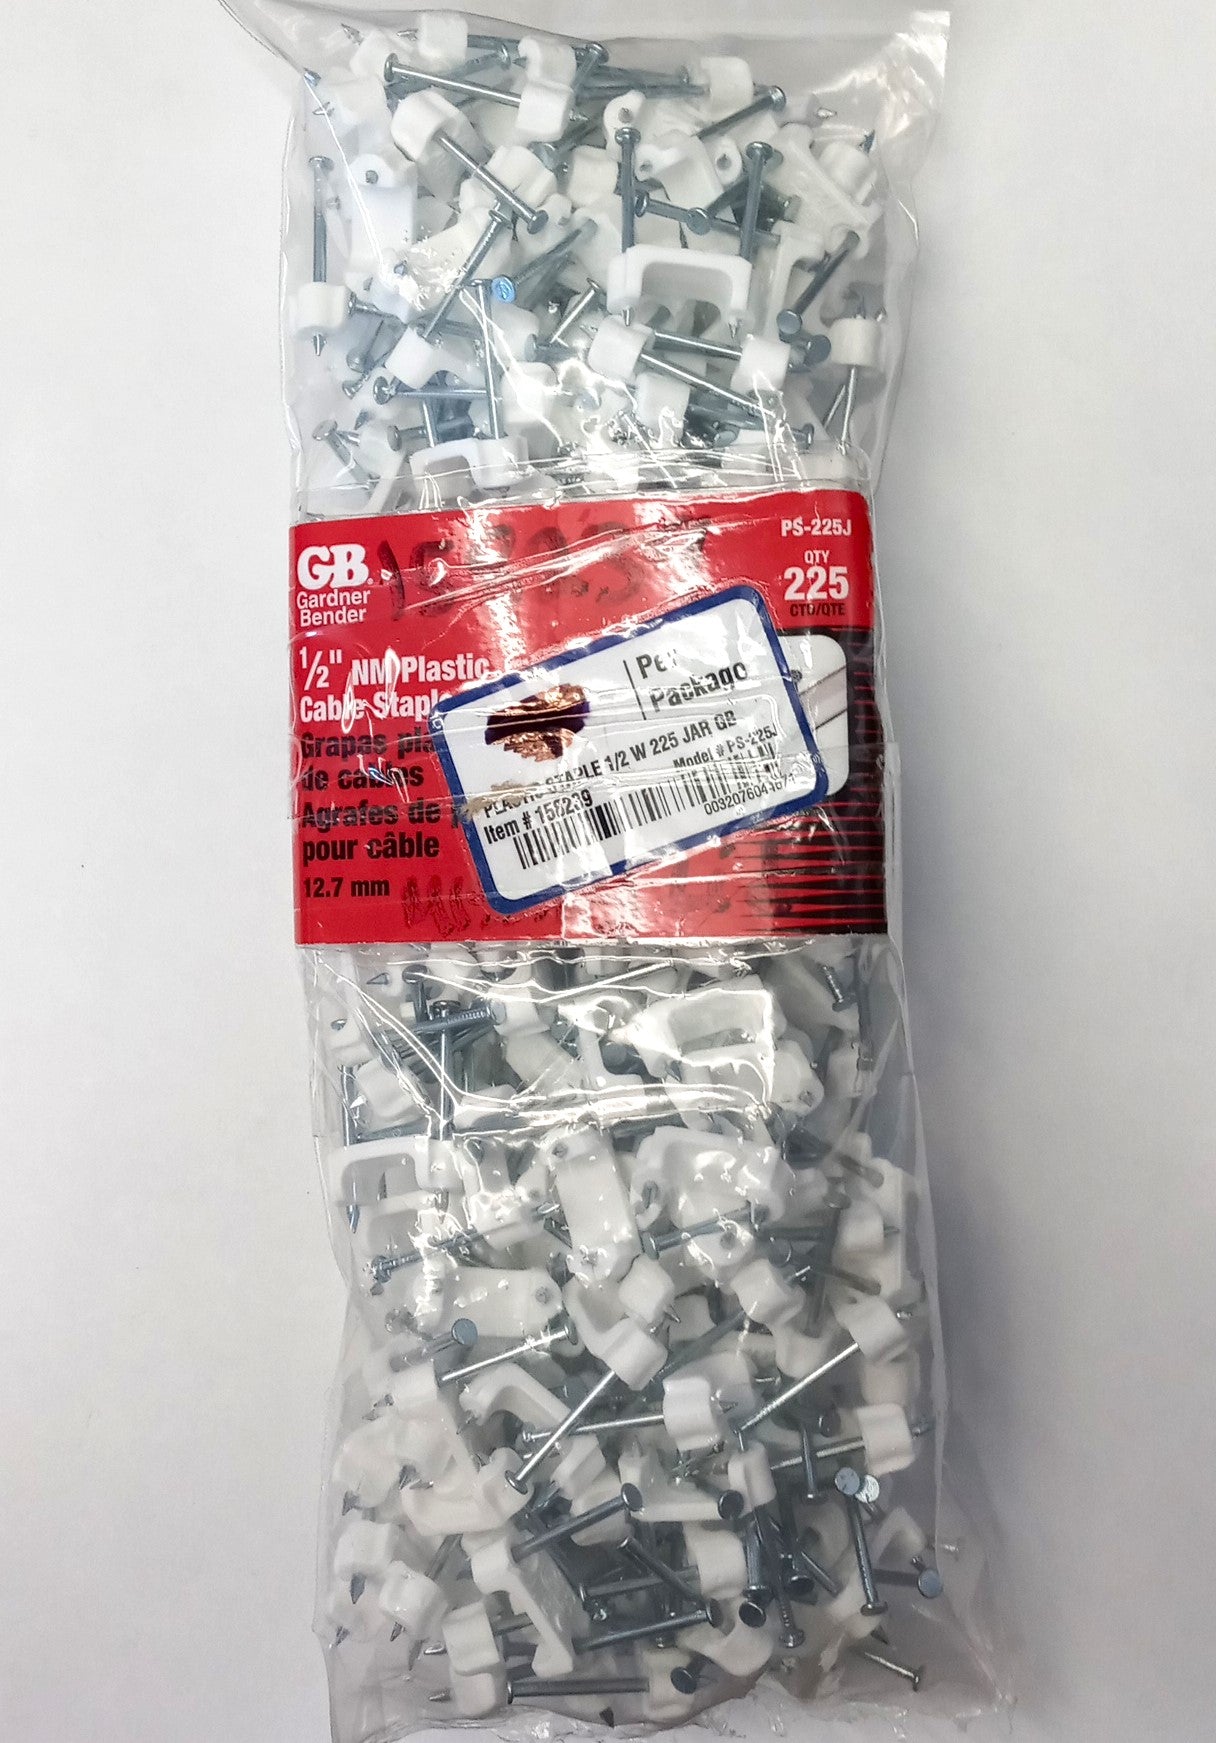 Gardner Bender PS-225JW ½" White Plastic Cable Staples 225 Pieces USA